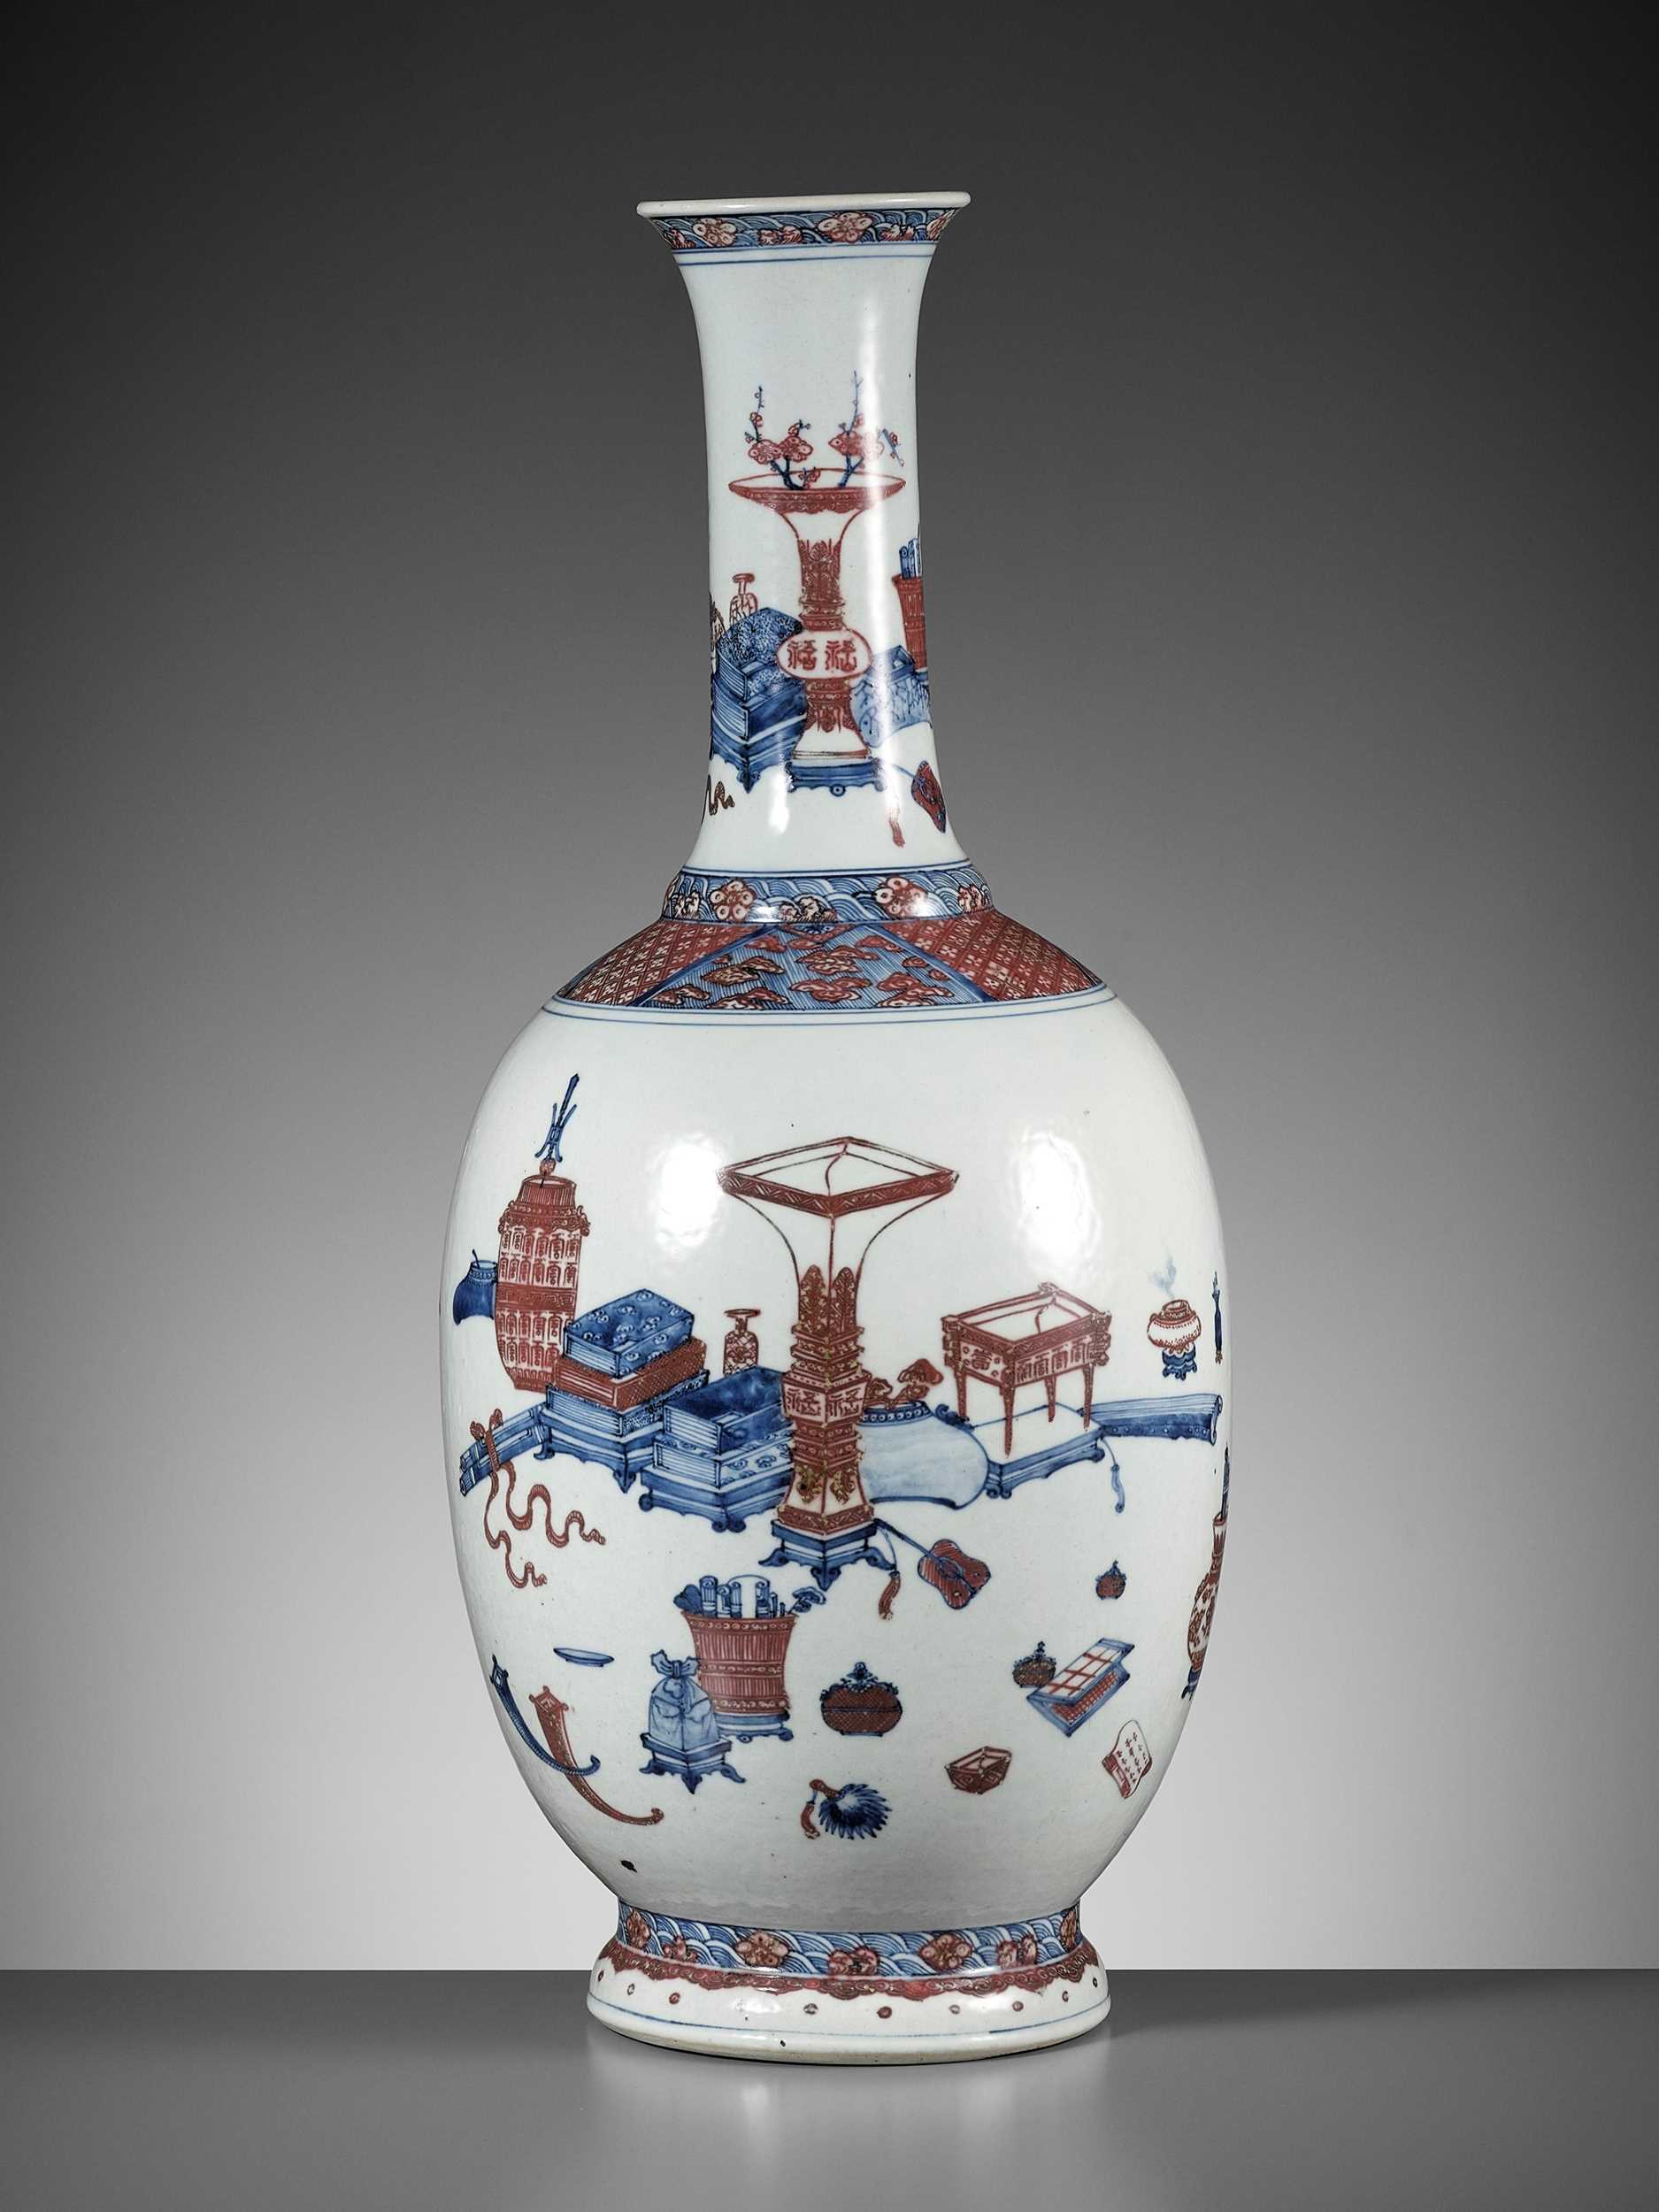 Lot 116 - A LARGE UNDERGLAZE-BLUE AND COPPER-RED-DECORATED ‘ANTIQUE TREASURES’ VASE, QIANLONG PERIOD